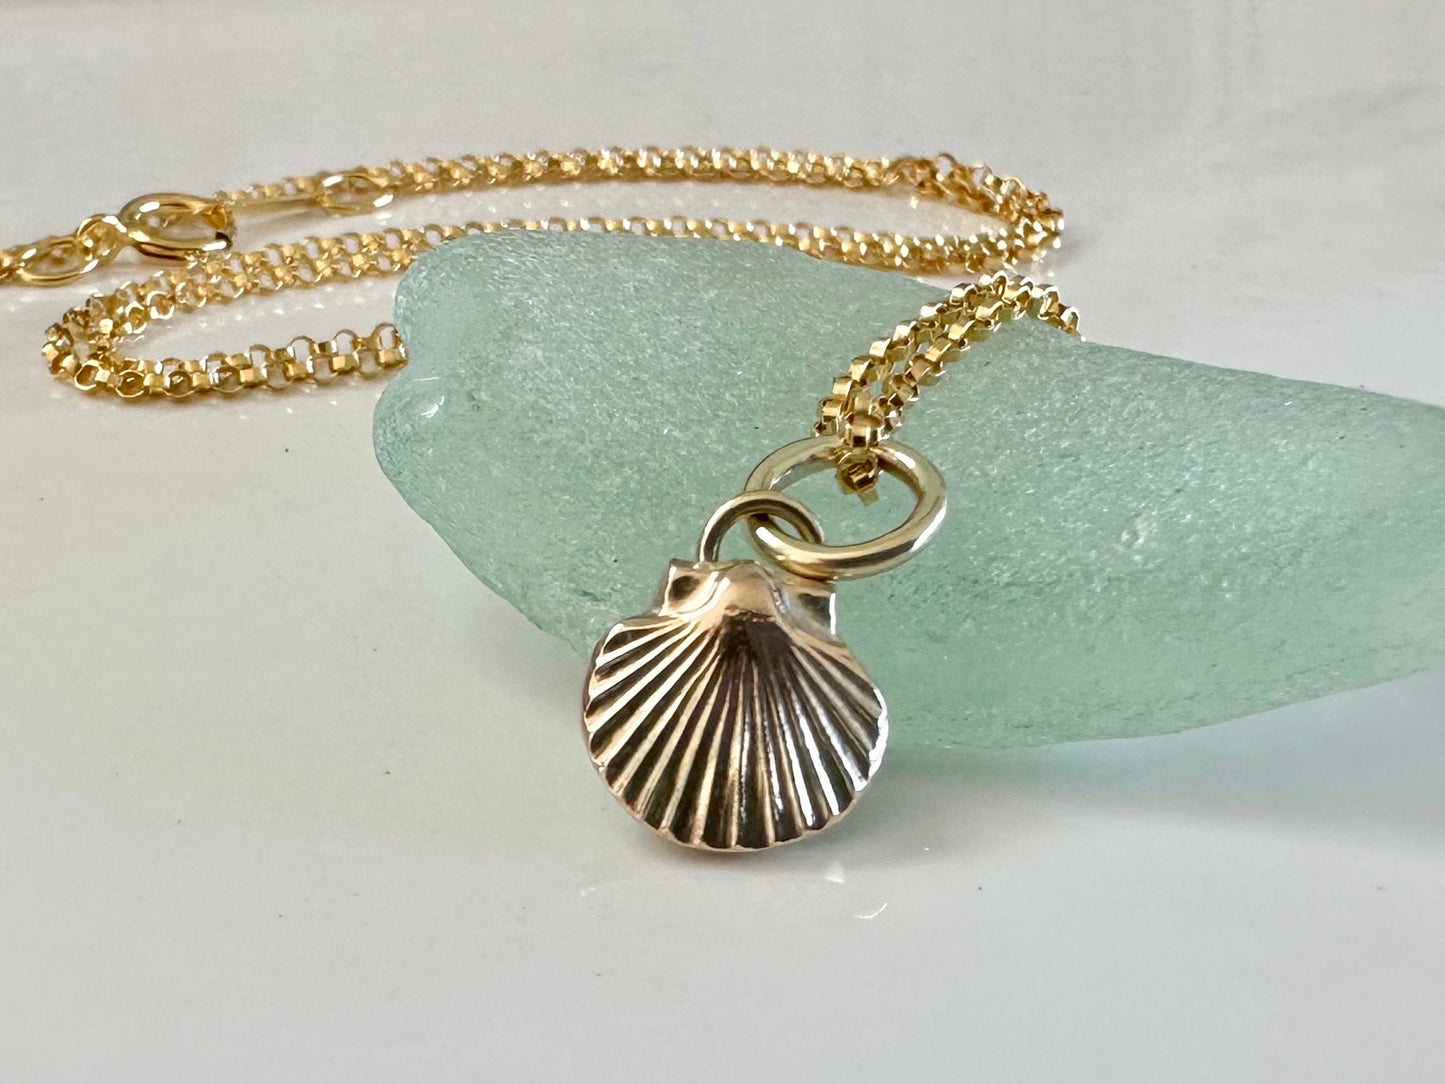 Hallmarked solid 9ct gold Scallop Seashell pendant charm necklace, handmade from recycled 9ct gold, Ready to ship